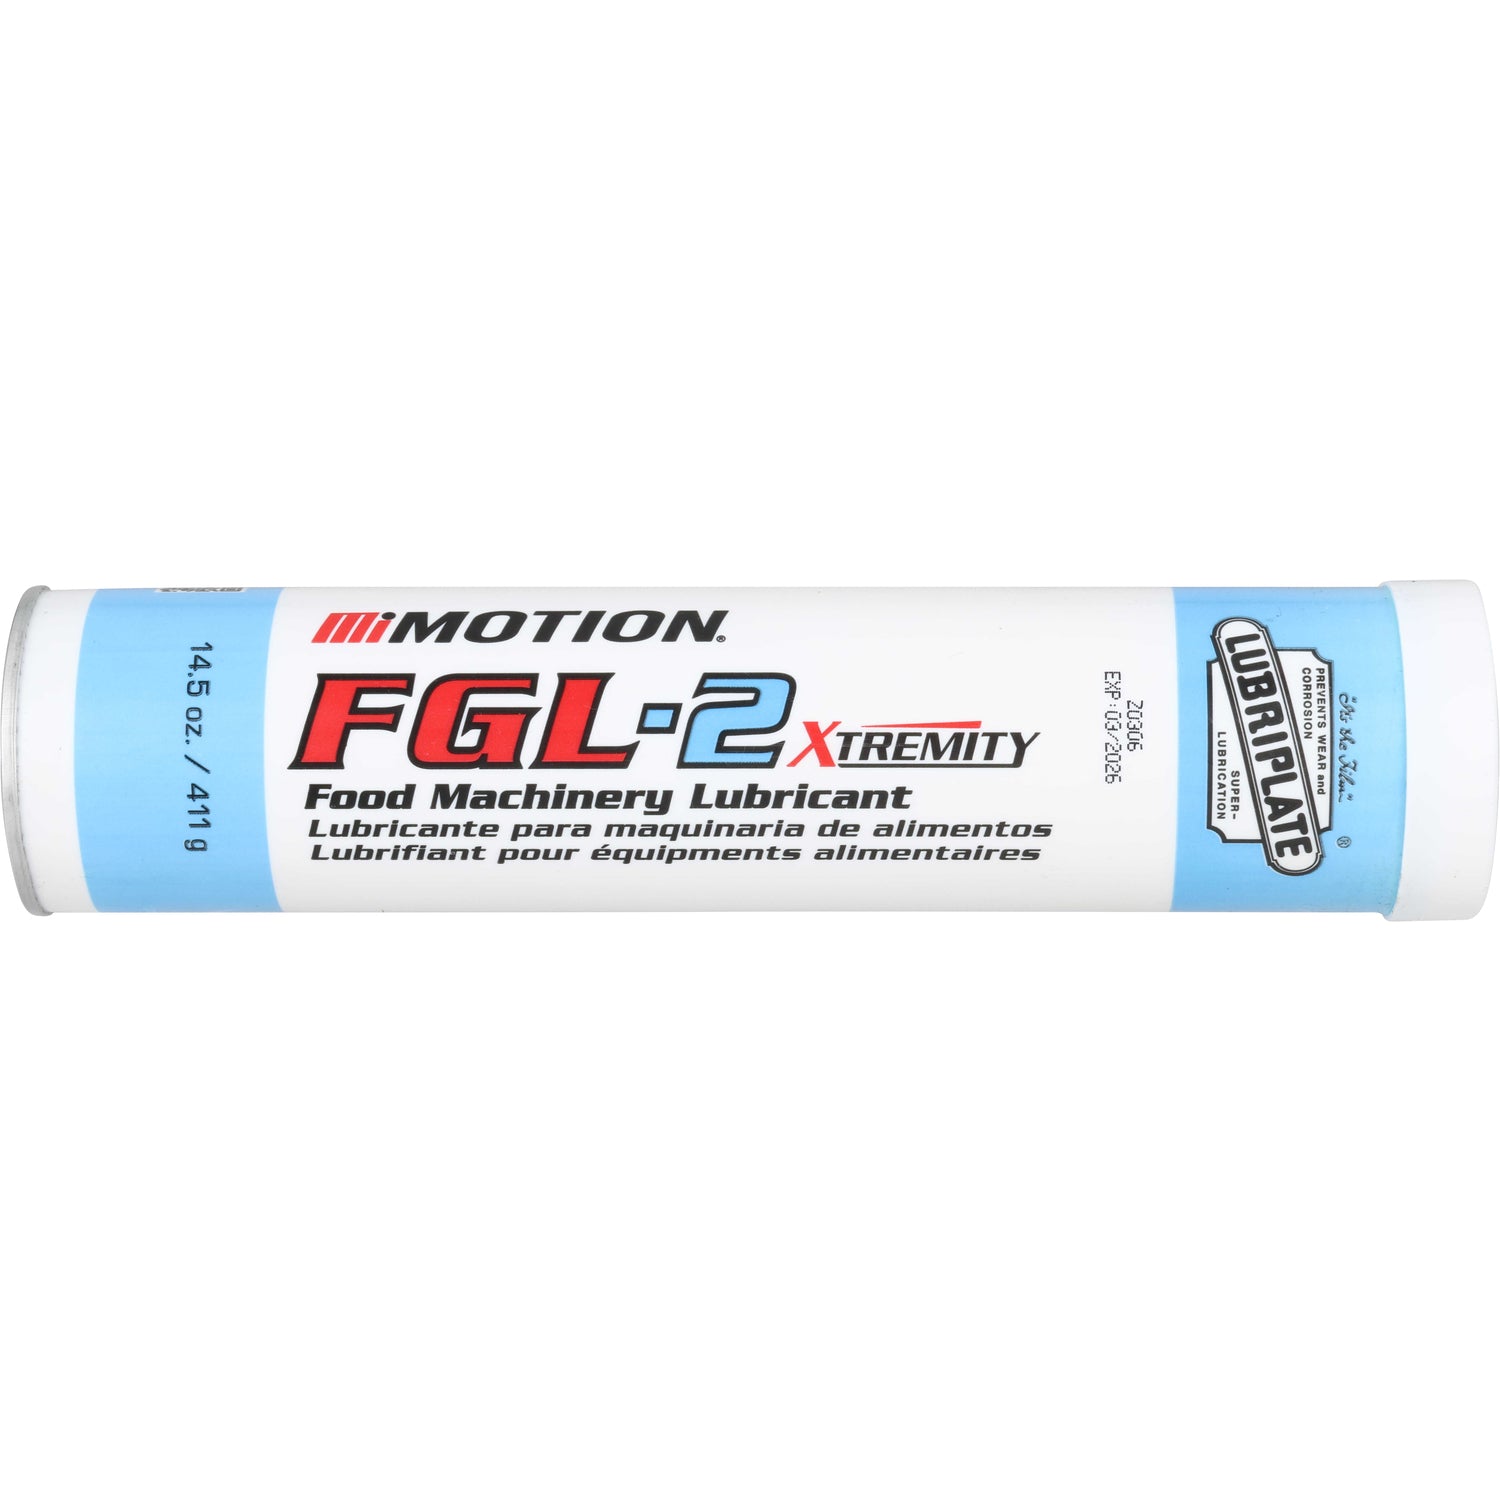 13oz blue and white tube of grease on white background. Text reads "Motion FGL-2 Xtremity Food Machinery Lubricant, Lubricante para maquinaria de alimentos, lubrifiant pour equipments alimentaires."